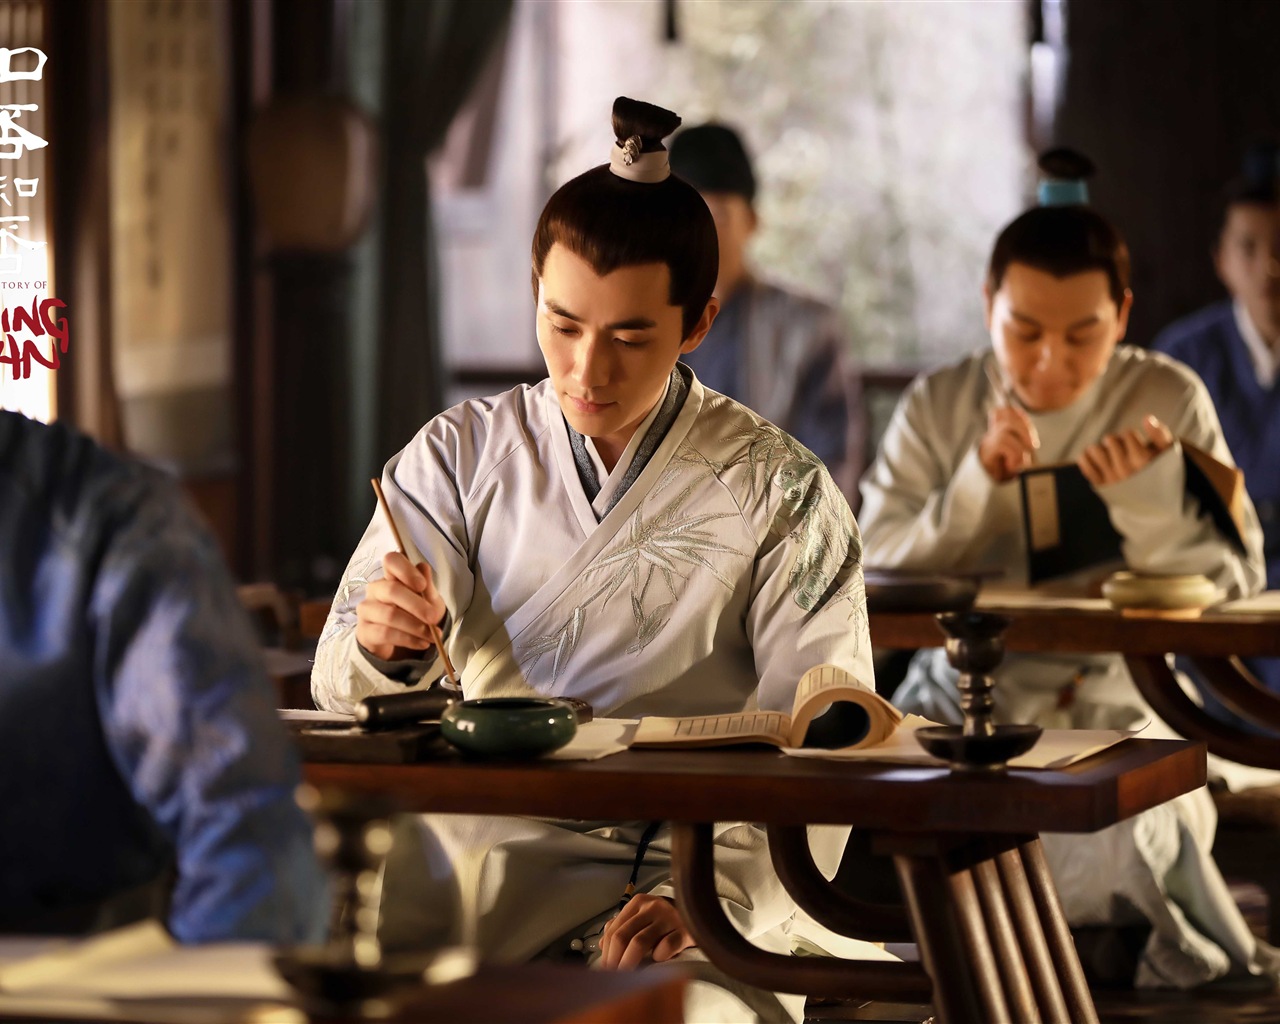 The Story Of MingLan, TV series HD wallpapers #37 - 1280x1024